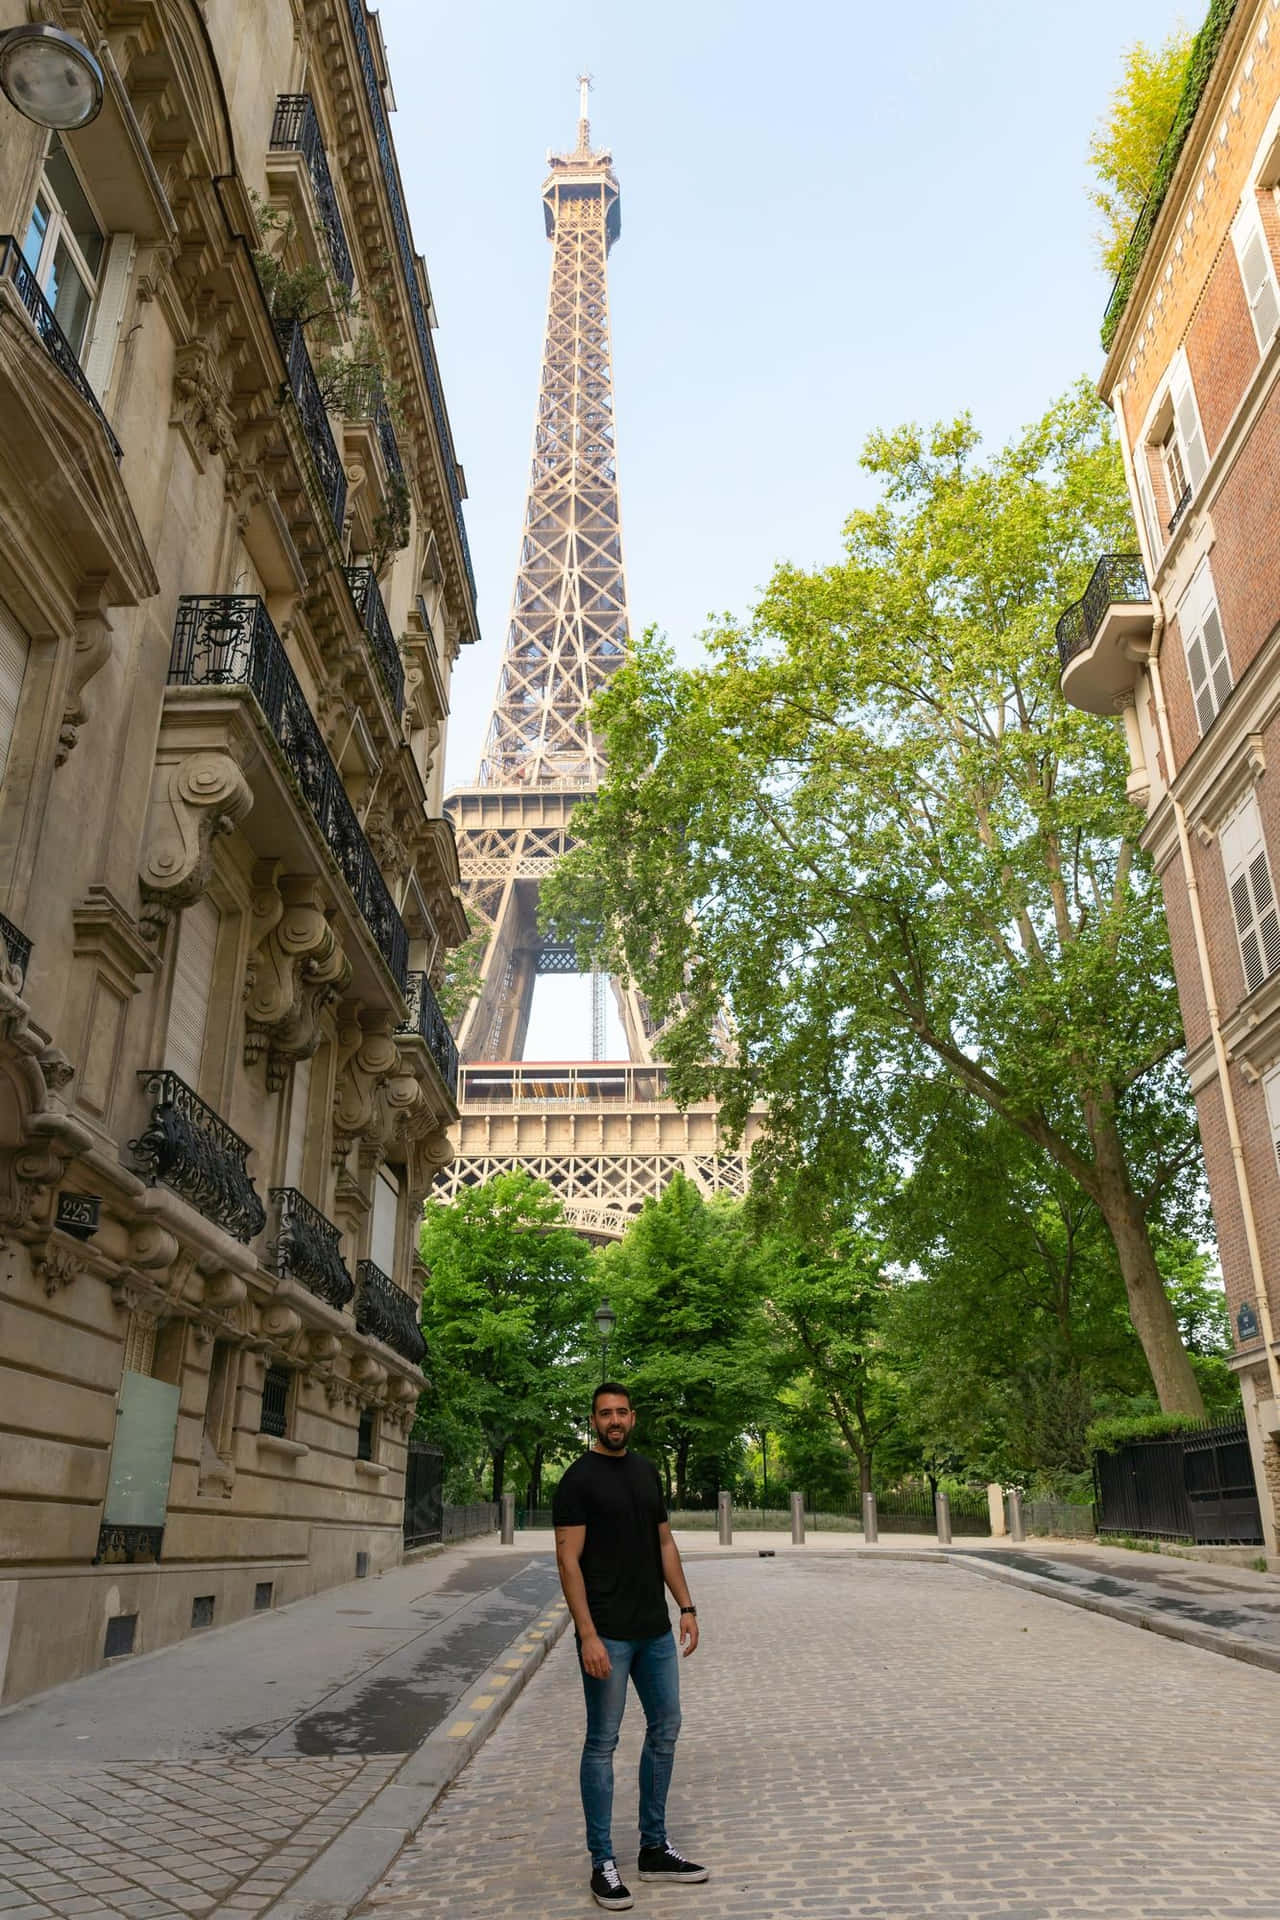 Take in the sights and sounds of once-in-a-lifetime Parisian culture